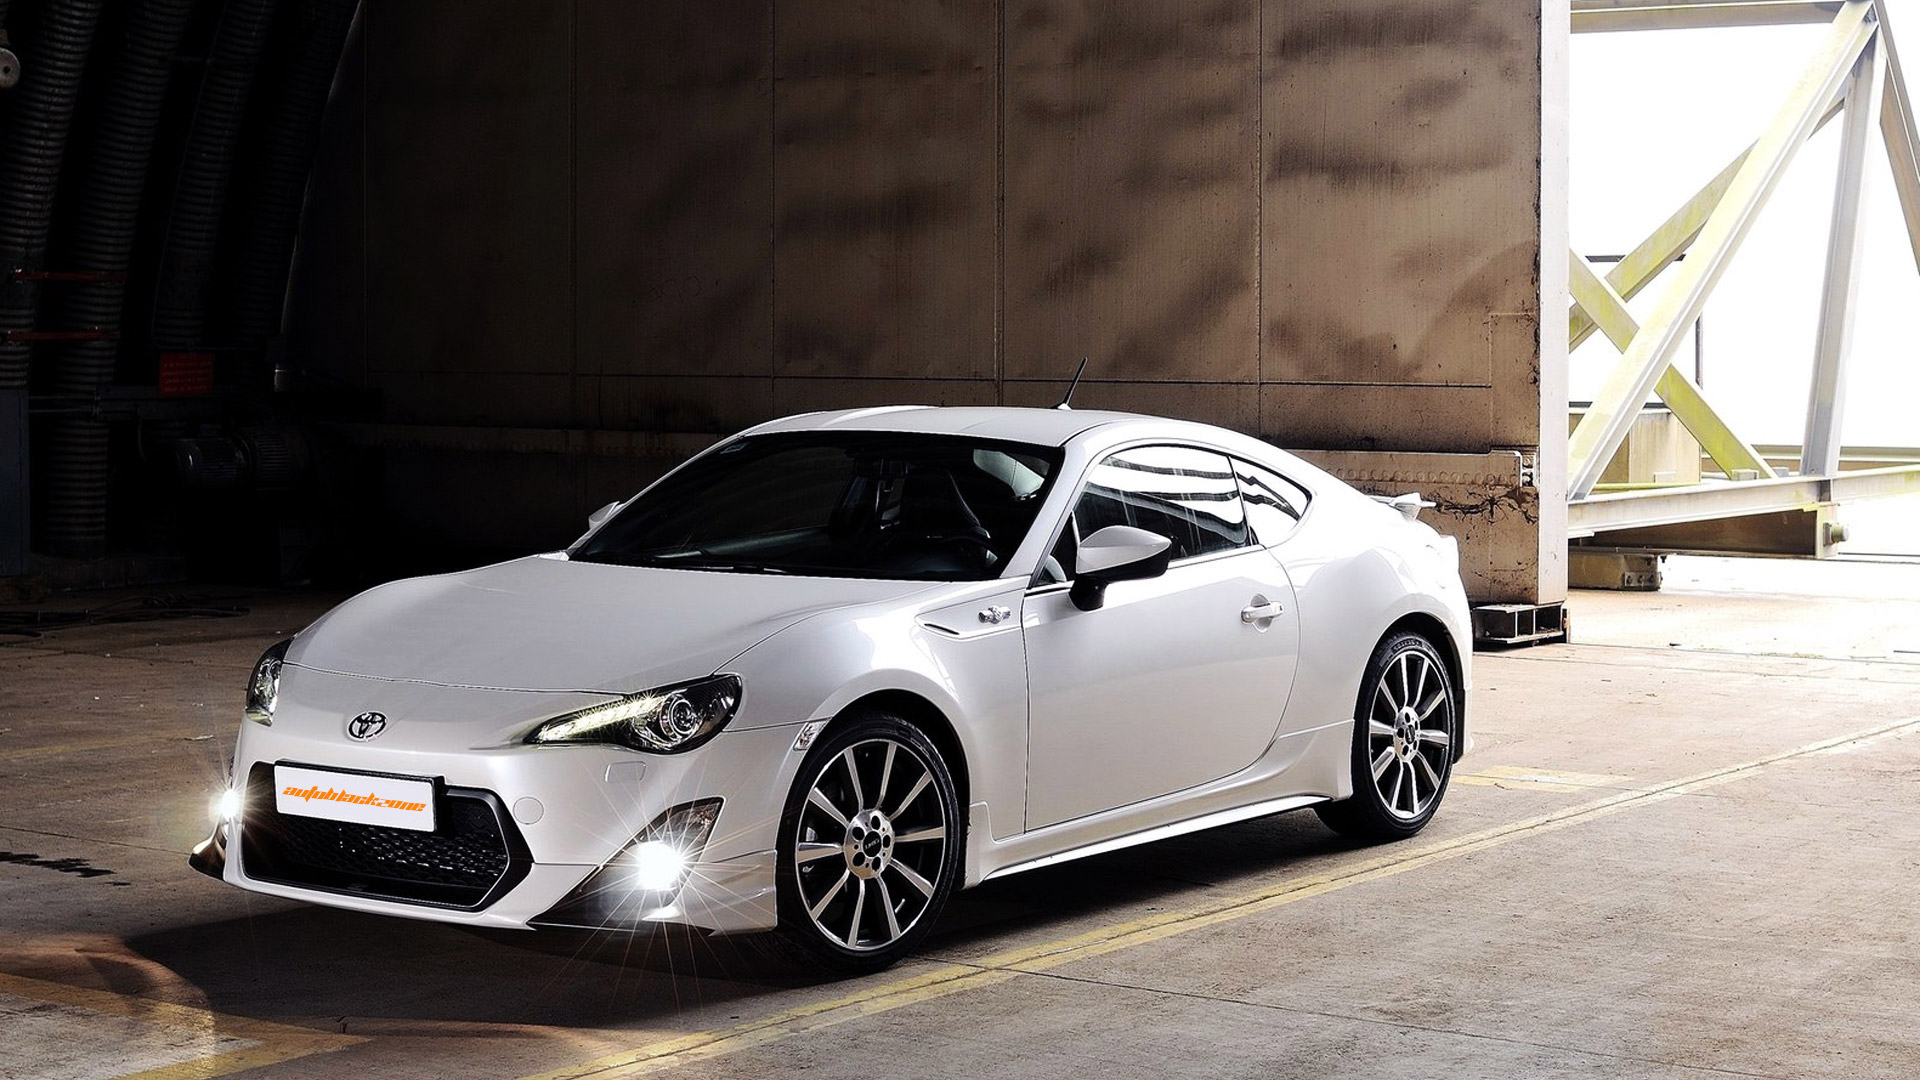 Free download Toyota GT 86 Wallpaper High Quality Download [1920x1080] for your Desktop, Mobile & Tablet. Explore Toyota GT 86 Wallpaper. Toyota GT 86 Wallpaper, Toyota 86 Wallpaper, Toyota Wallpaper